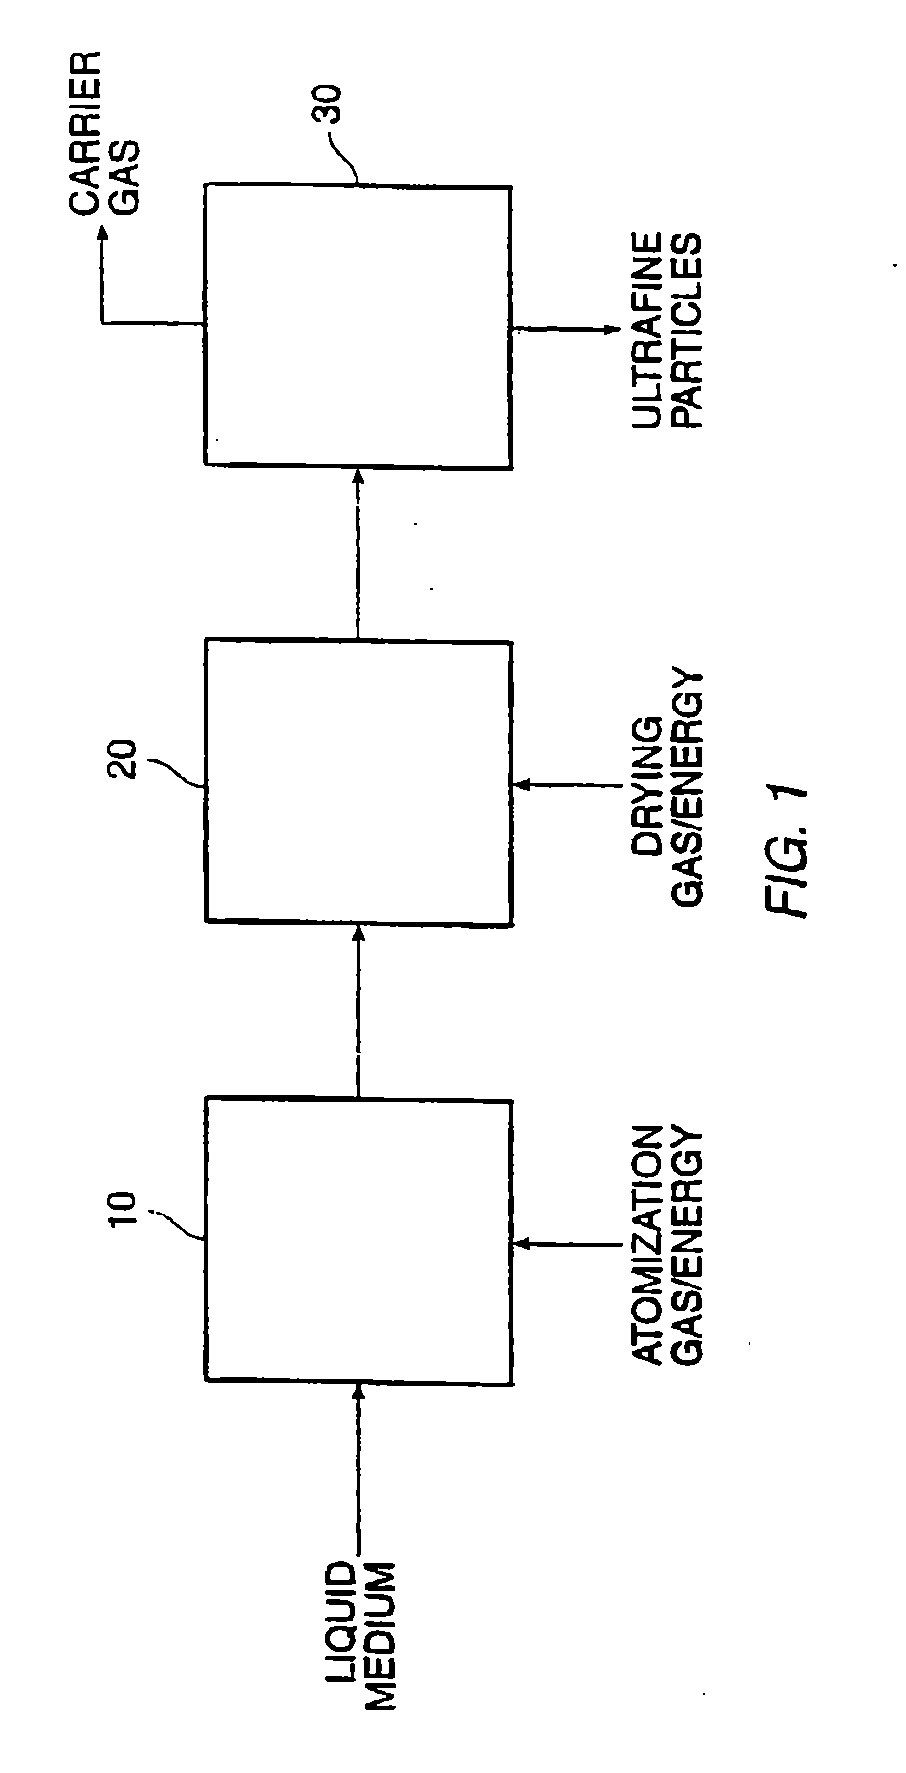 Systems and processes for spray drying hydrophobic drugs with hydrophilic excipients